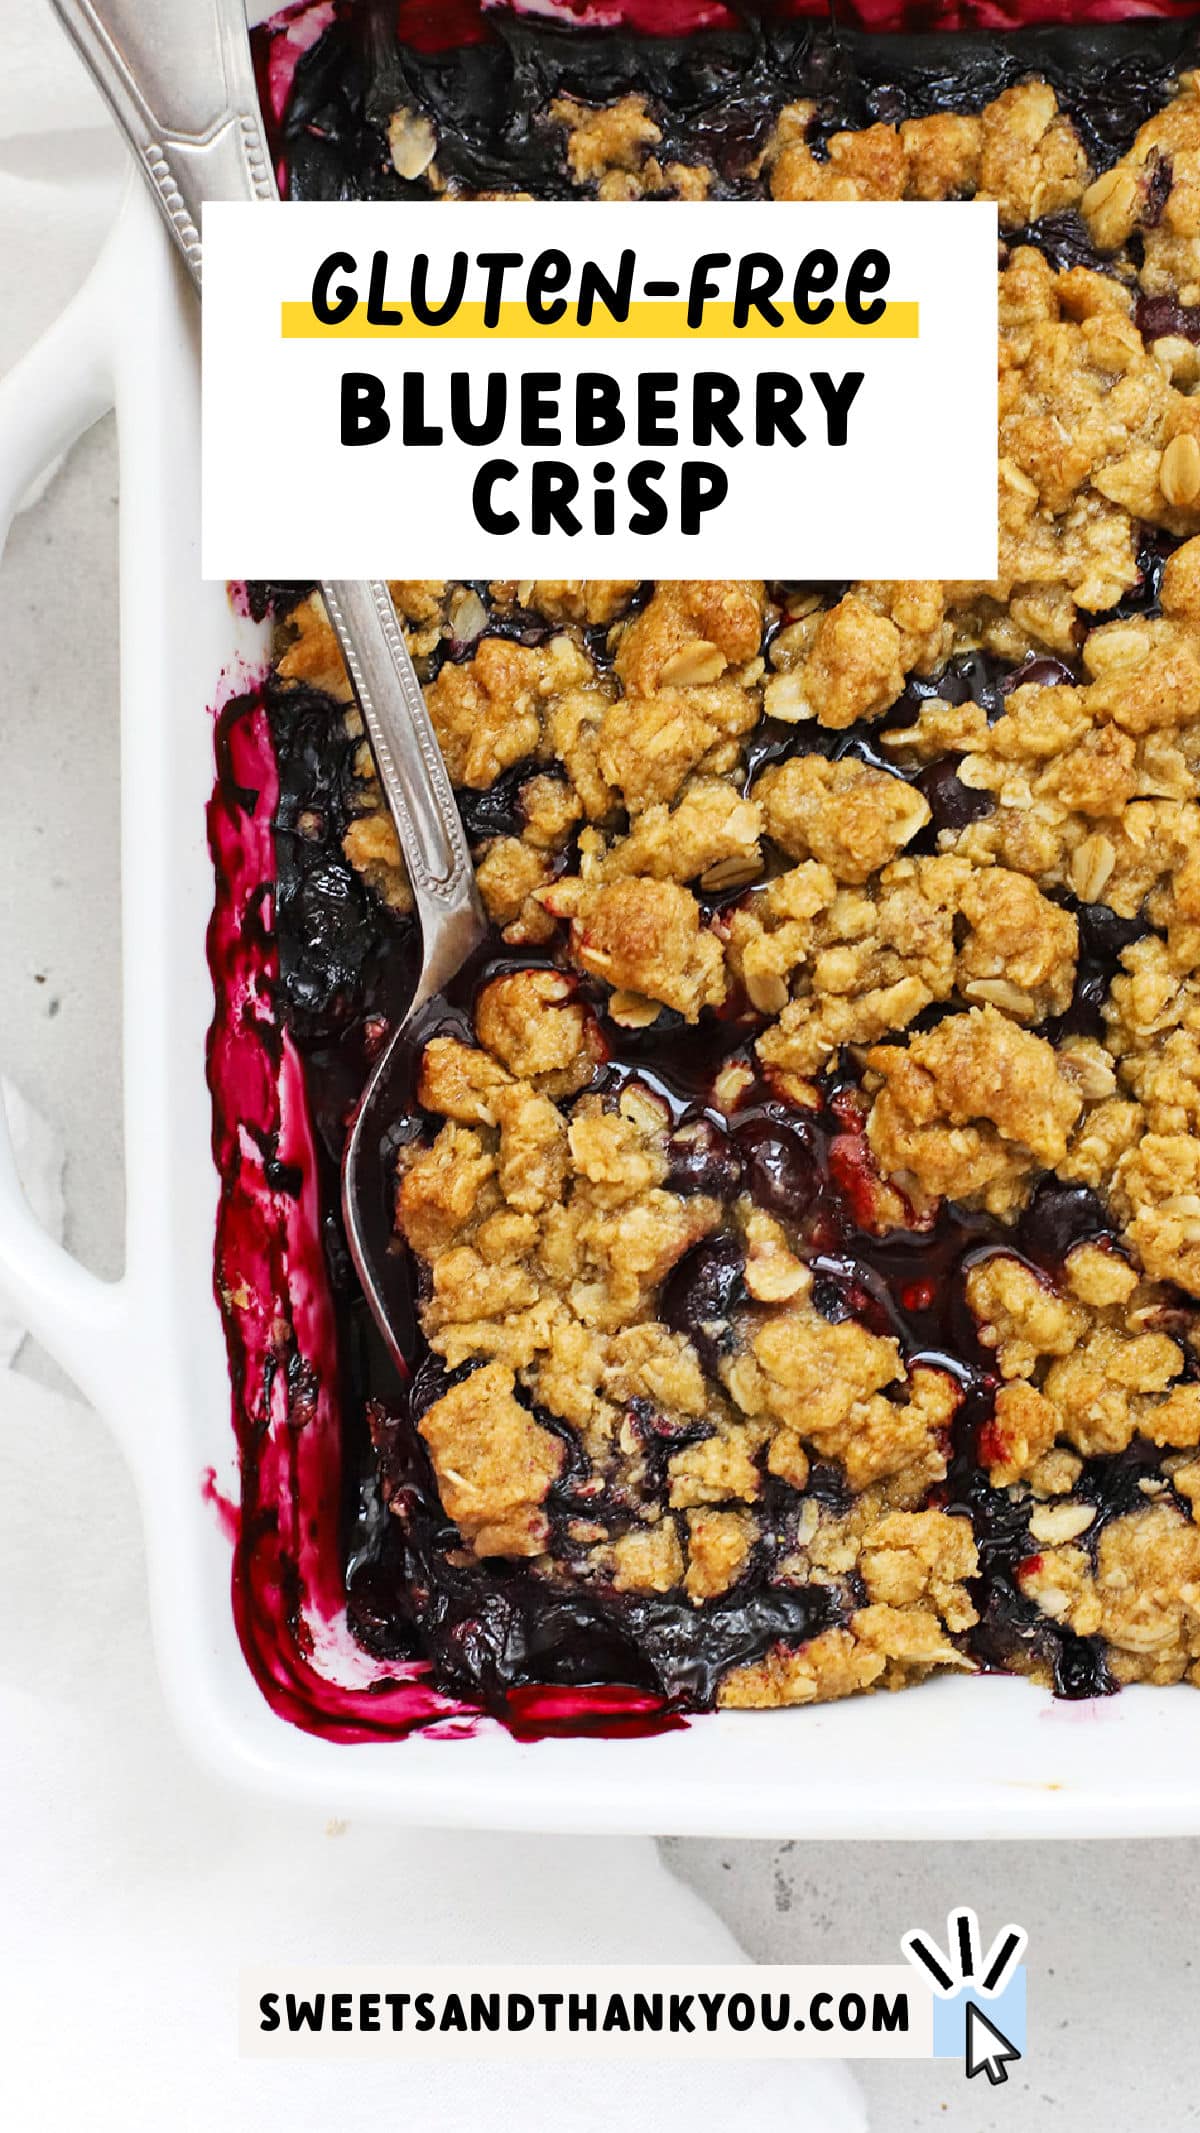 Gluten-Free Blueberry Crisp is the perfect spring or summer dessert. (You'll love the crispy crumble topping.) With its jammy blueberry filling and crispy oat crumble topping, our easy blueberry crumble recipe is a total delight from start to finish. (Especially when you pair it with a scoop of vanilla ice cream!) Get the recipe and a few tasty variations to try at sweetsandthankyou.com